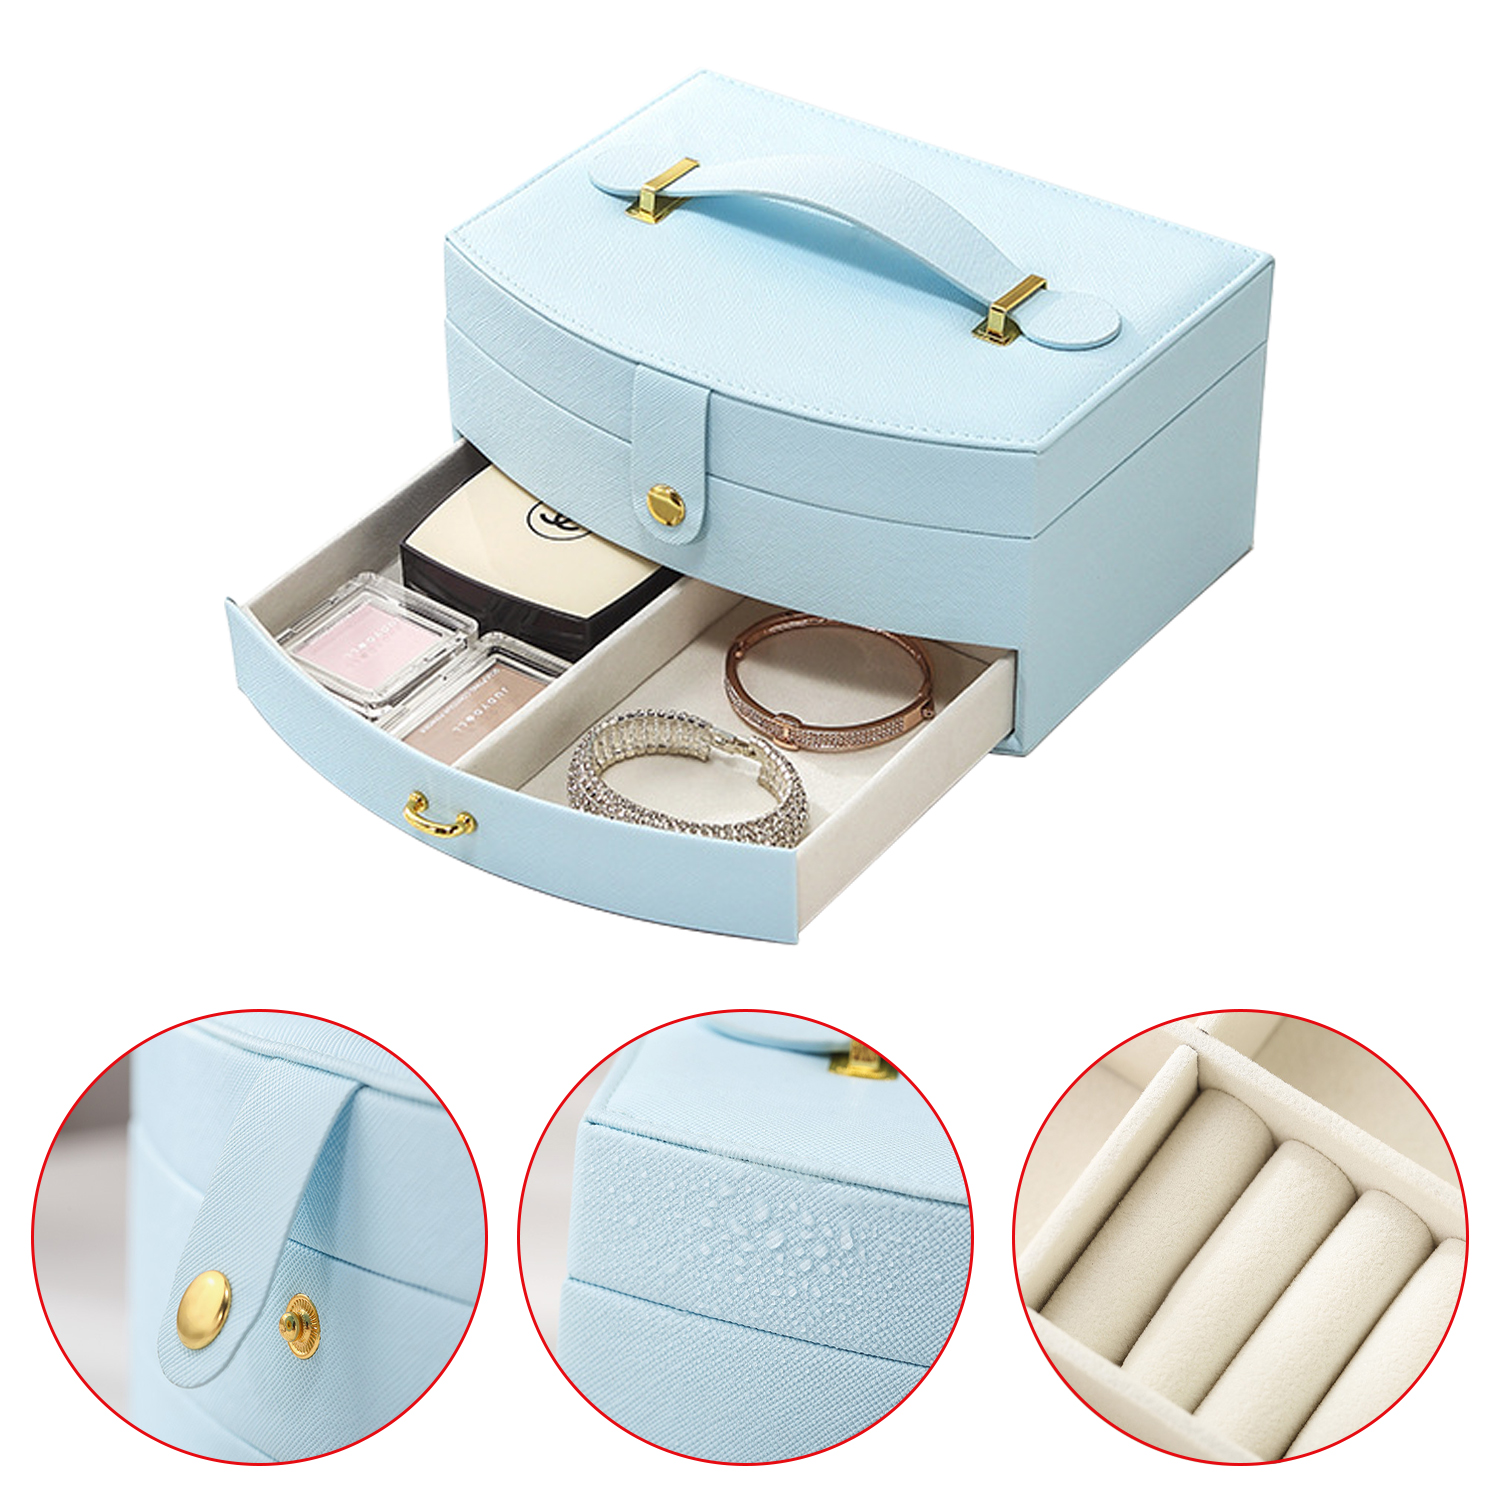 Wear-resist Leather Jewellery Box Travel Jewellery Organizer Multifunction Necklace Earring Storage Box with Mirror Gifts